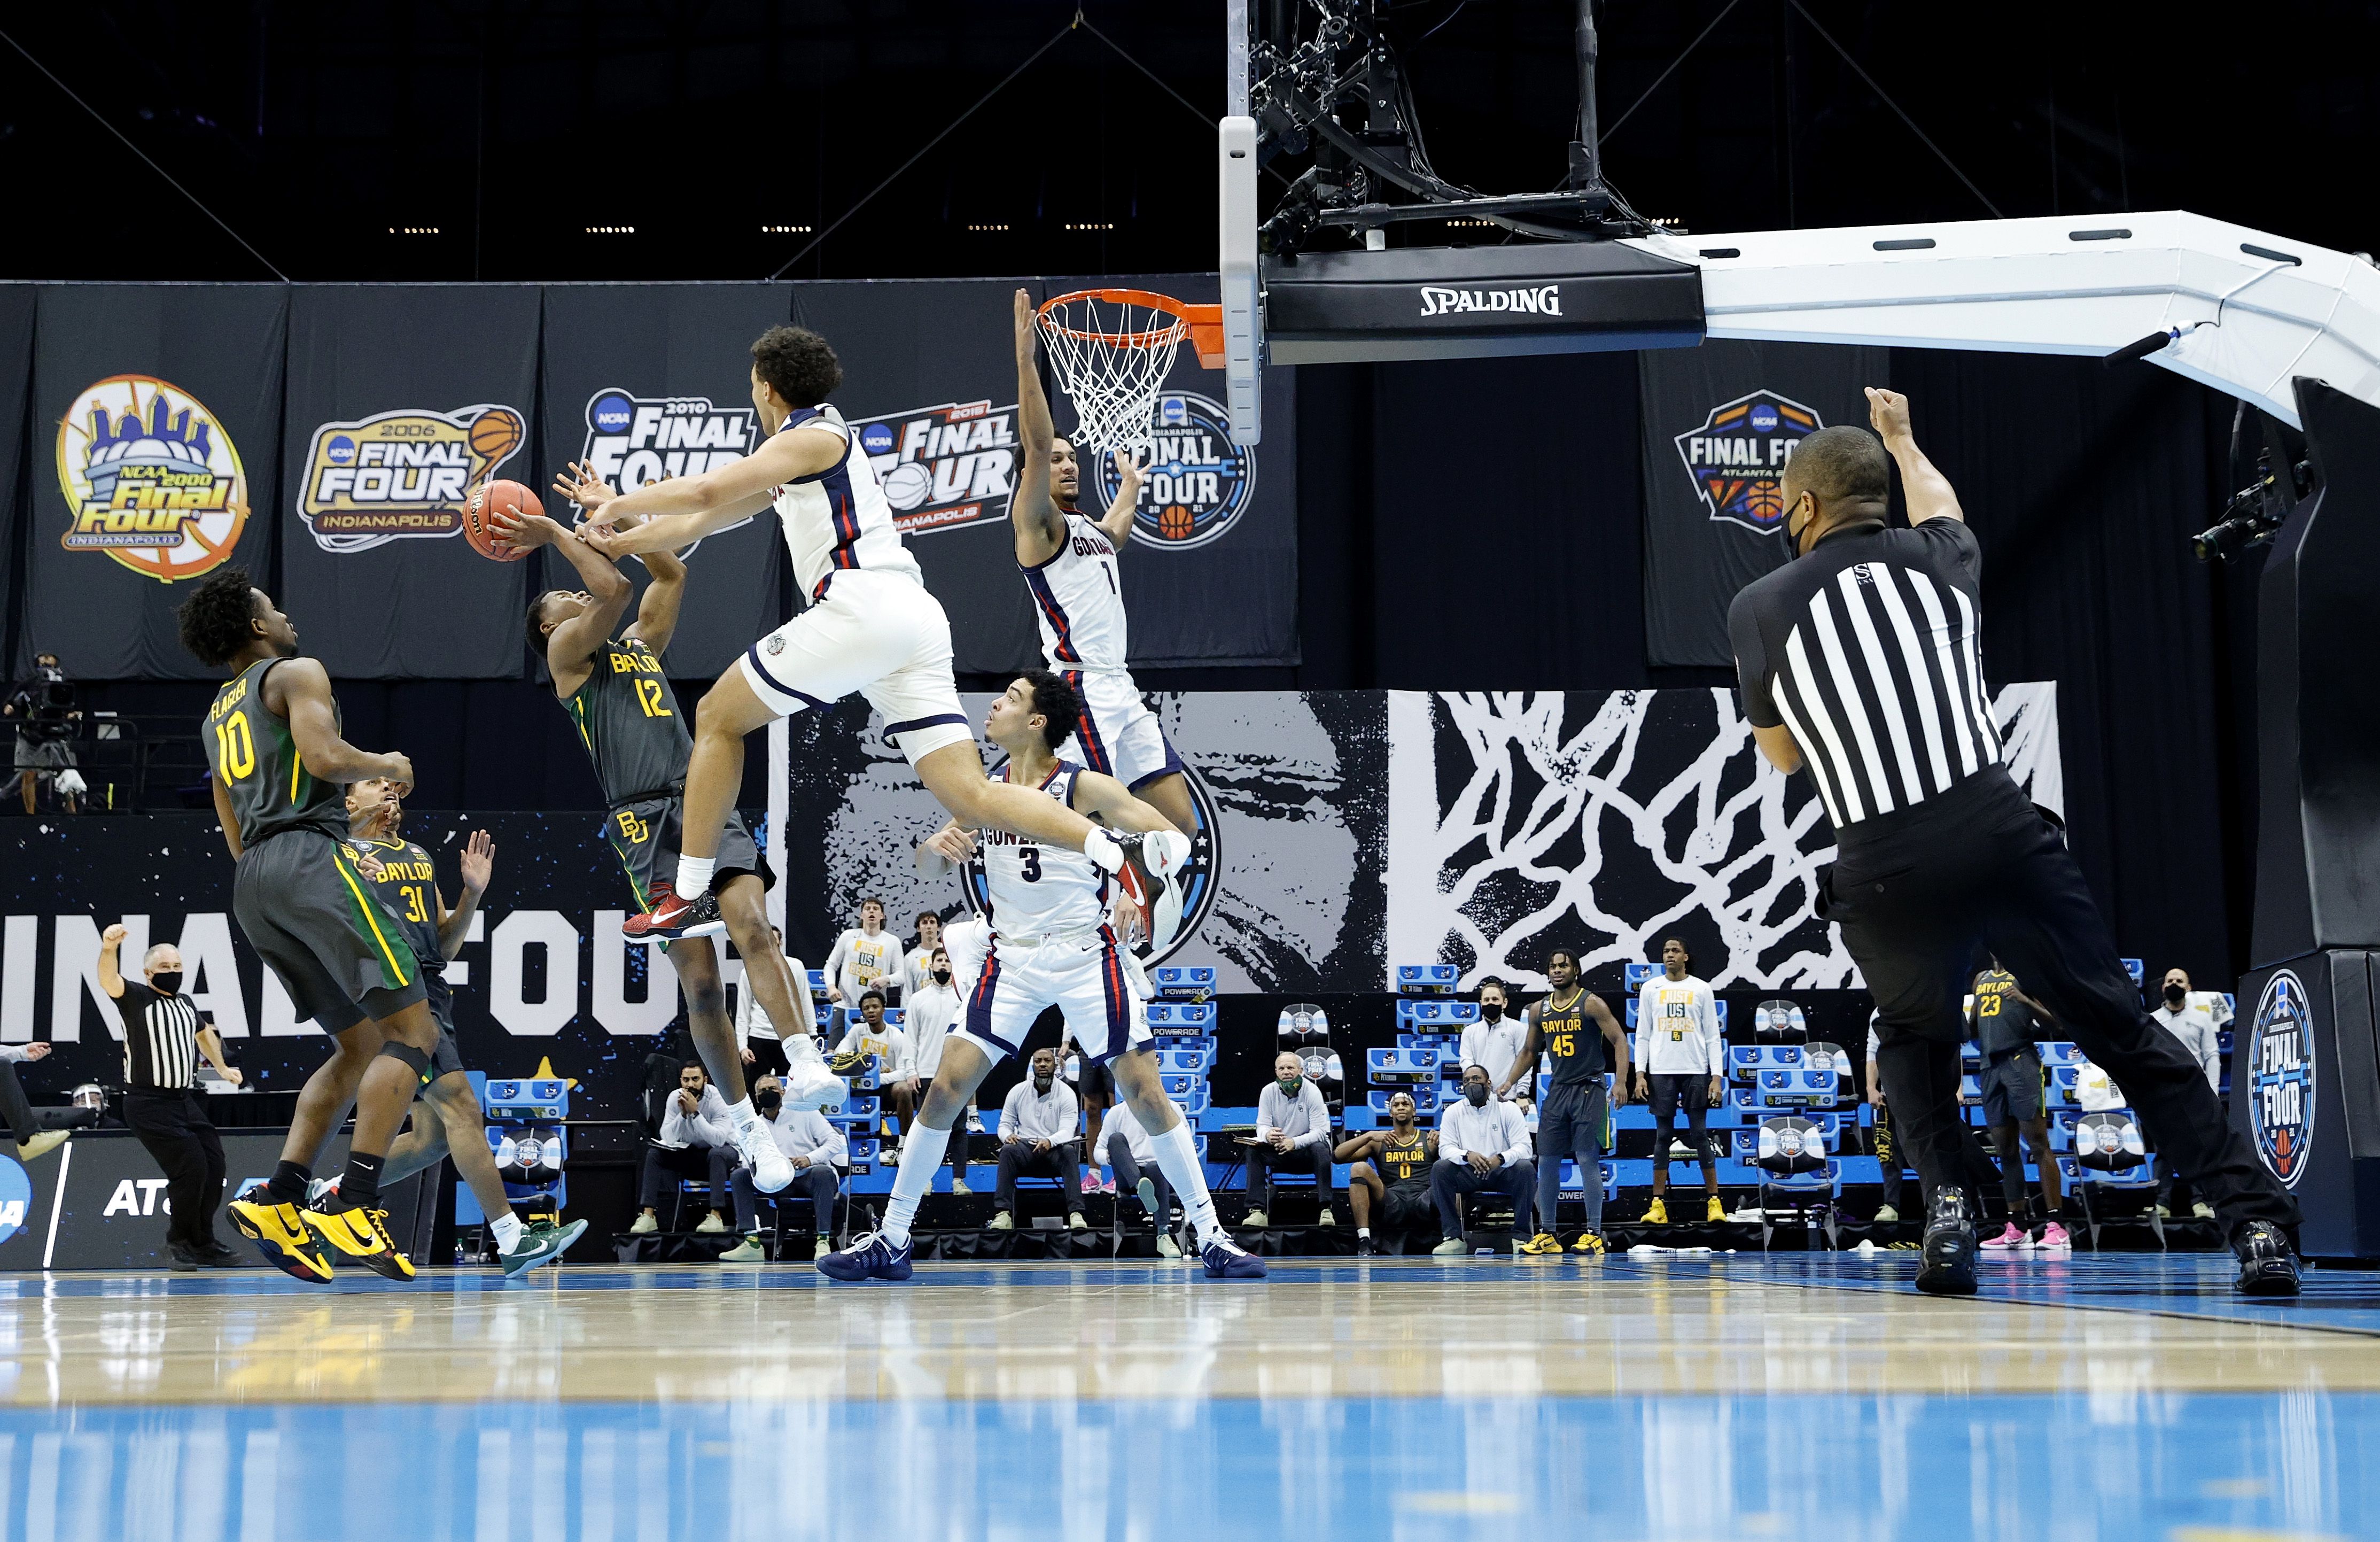  Jared Butler #12 of the Bears drives to the basket against the Gonzaga Bulldogs in the National Championship game of the 2021 NCAA Men's Basketball Tournament in Indianapolis, Indiana.